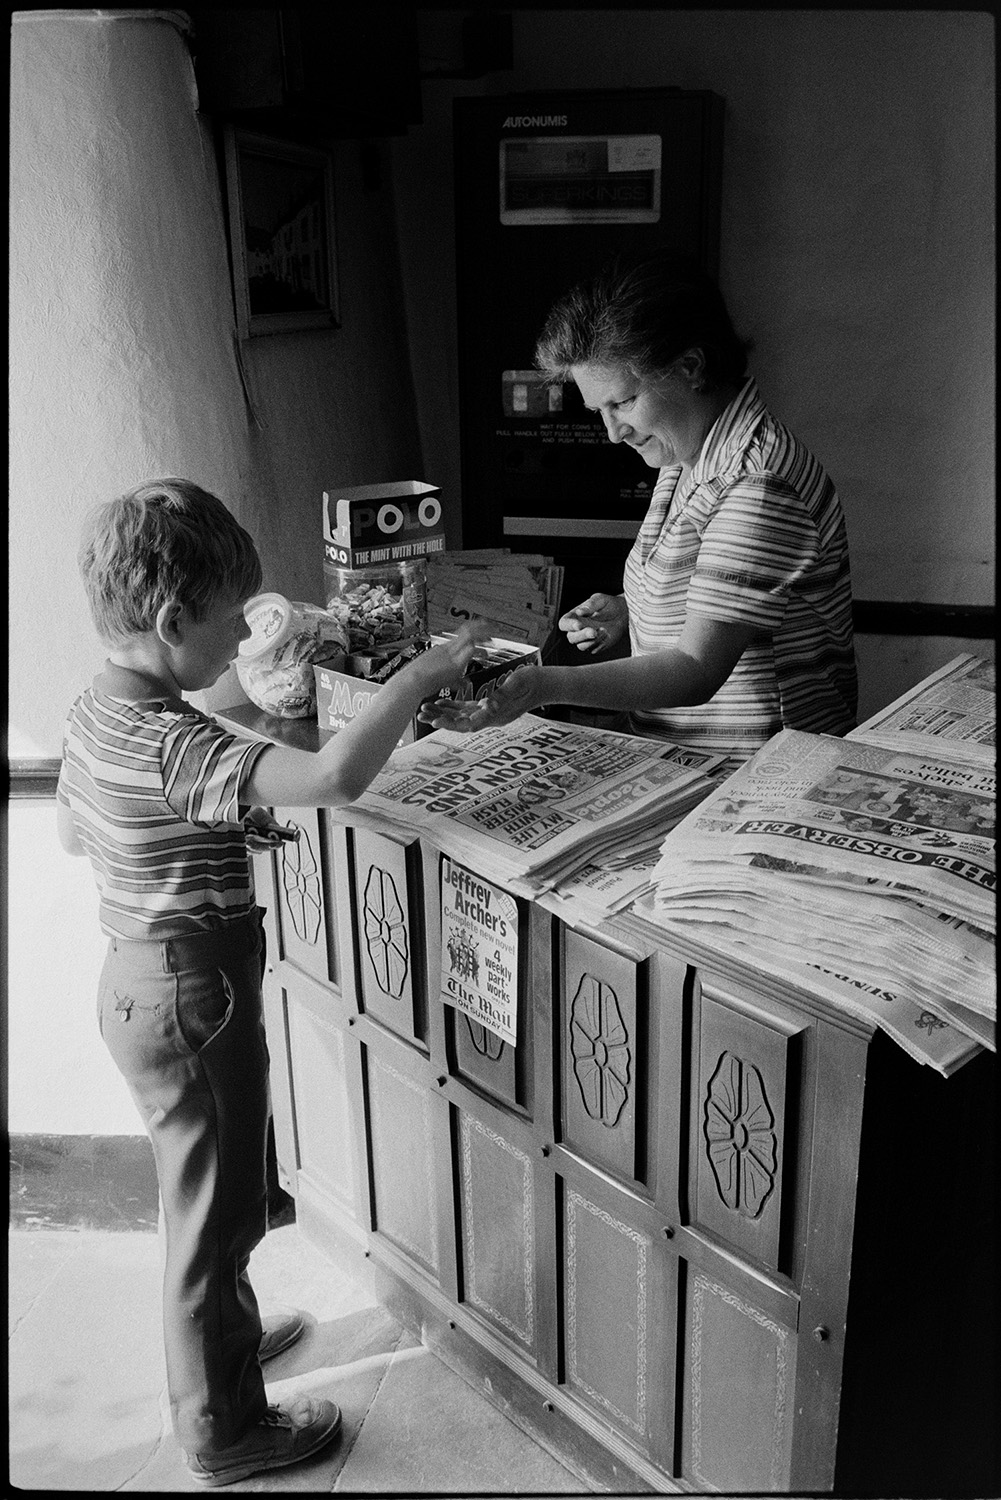 Sunday newspaper seller at door of pub, people buying papers.
[A boy buying sweets from a woman behind a carved wooden counter in the Rams Head Inn, Dolton on which there are sweets and piles of Sunday papers for sale. On the front of the counter is an advertisement for Jeffrey Archer's new novel to be published in four parts in The Mail on Sunday.]